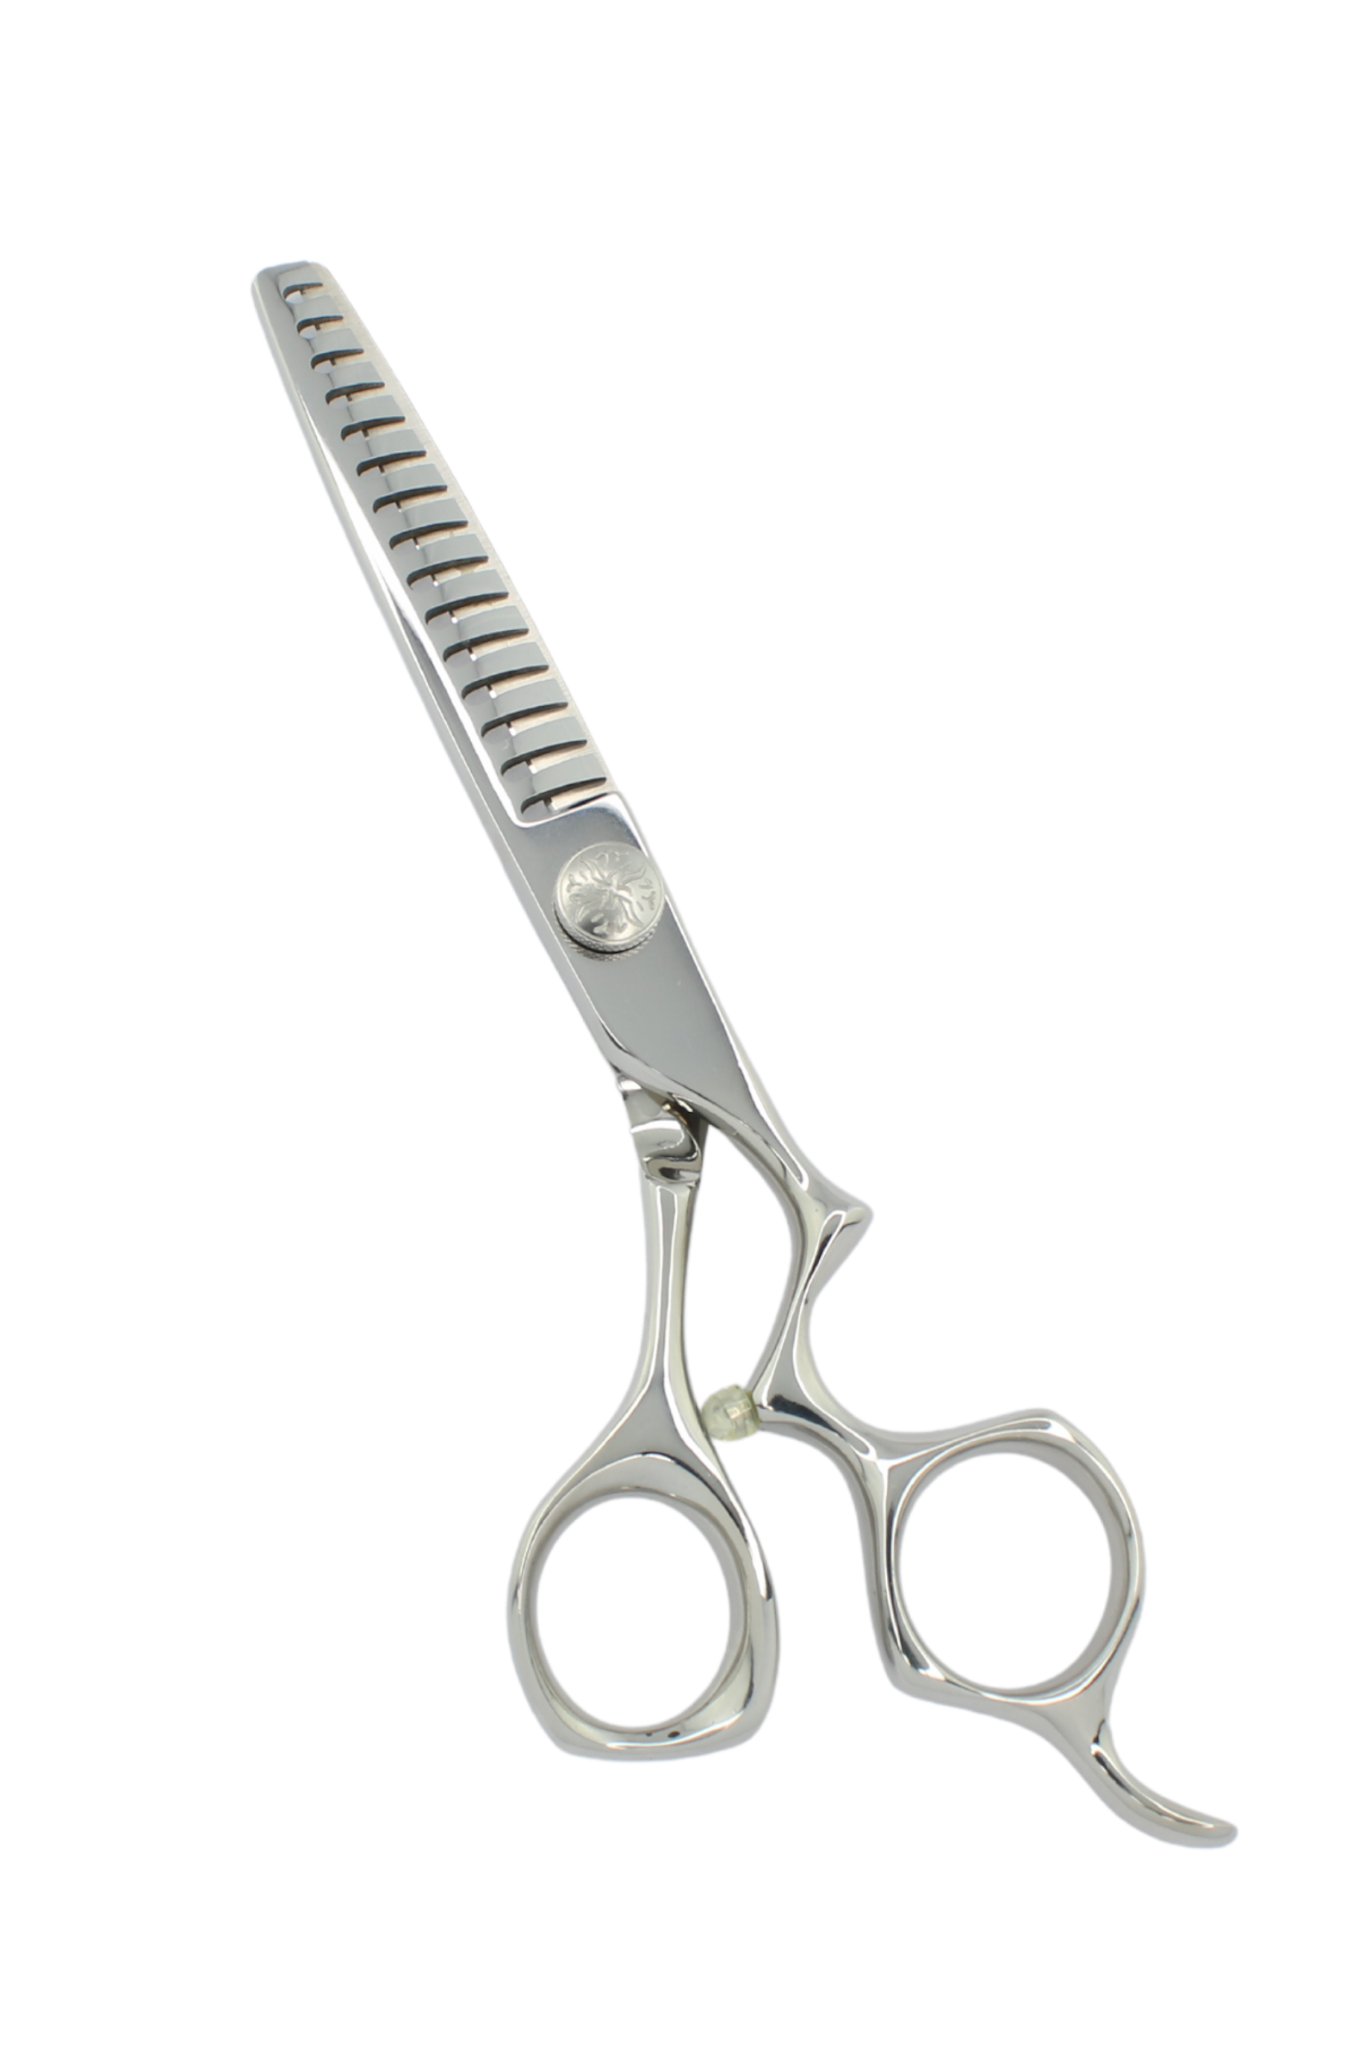 iCandy Athena TEX Right Handed Texturising Scissor Size- 6.0 inch-pic1